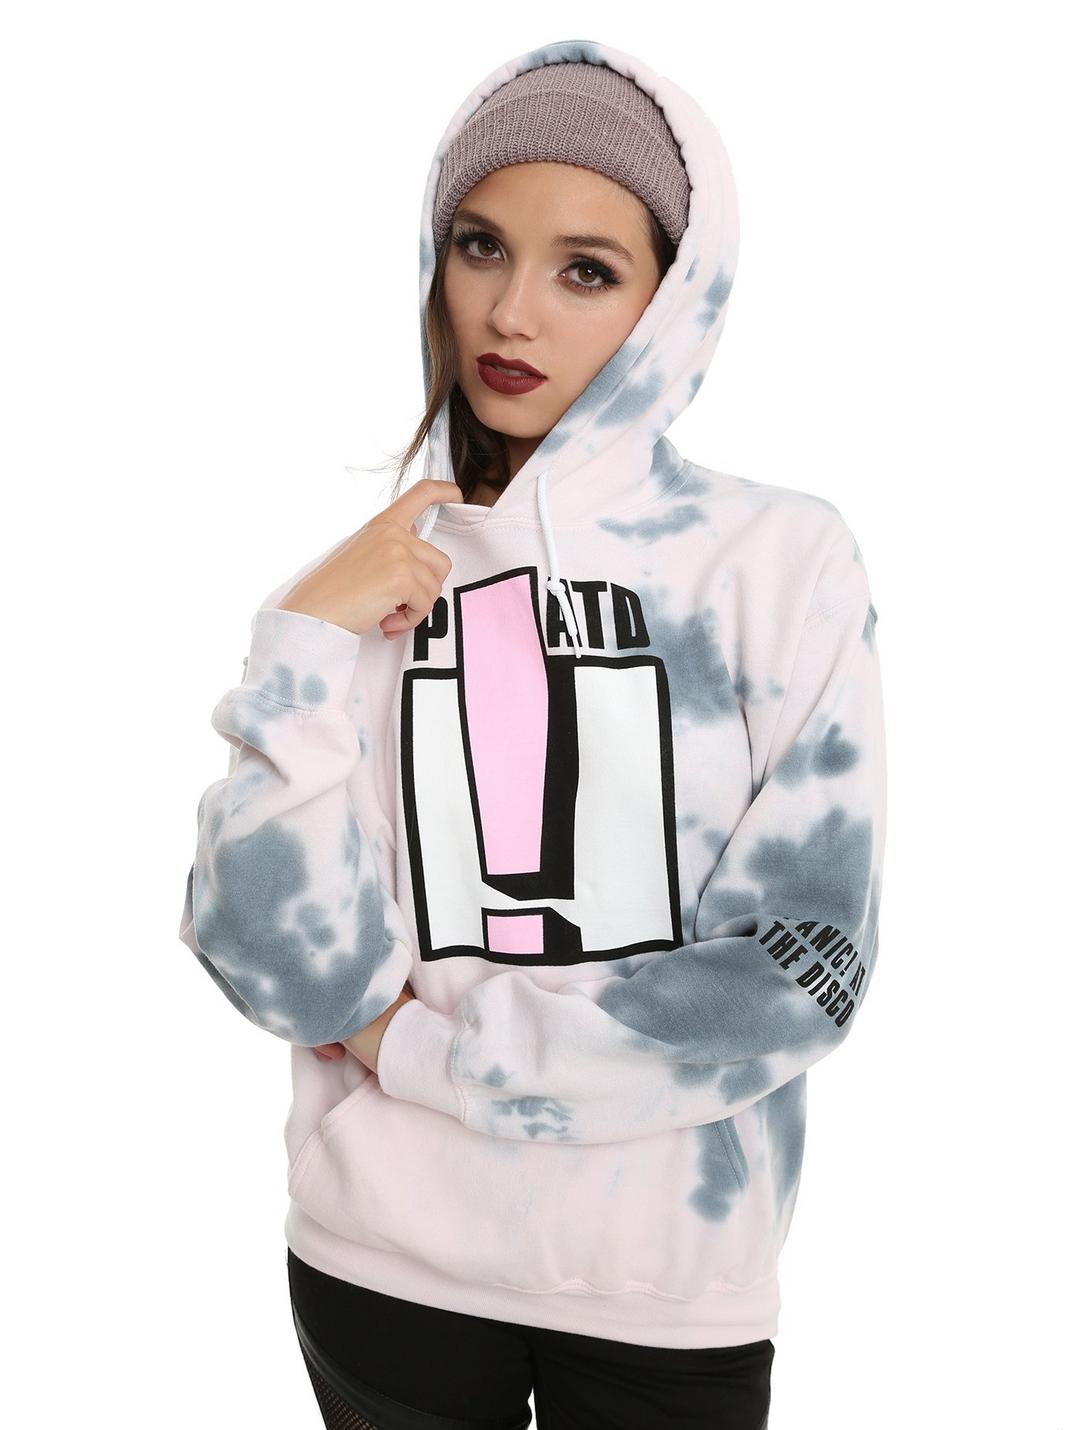 Panic! At The Disco Exclamation Pink Tie-Dye Girls Hoodie, PINK, hi-res